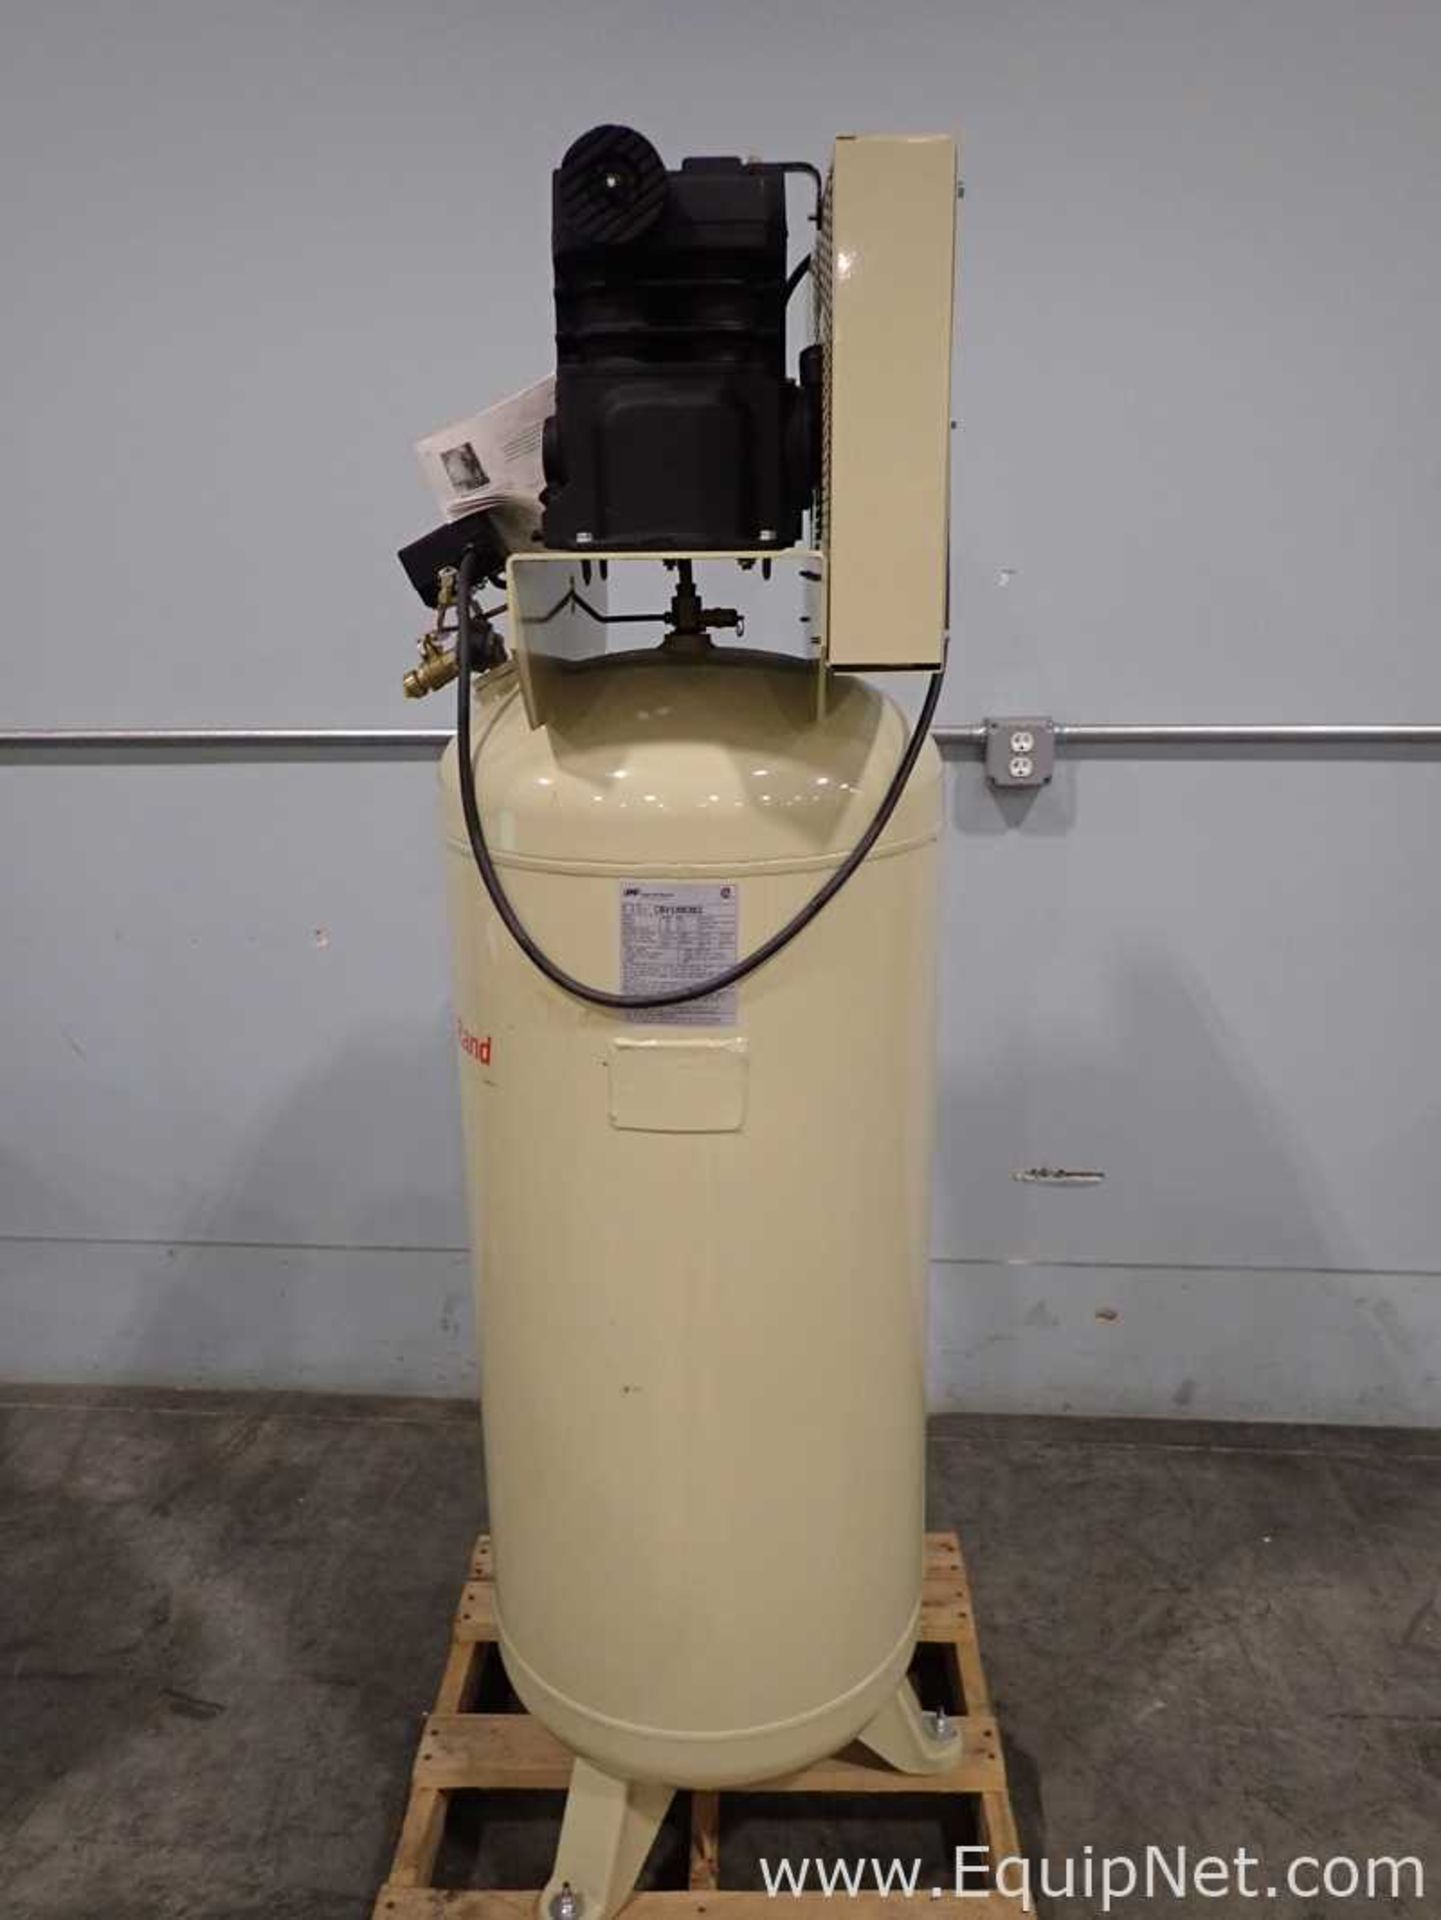 Ingersoll Rand SS3660V with Kit 60 Gallon Air Compressor - Image 7 of 10